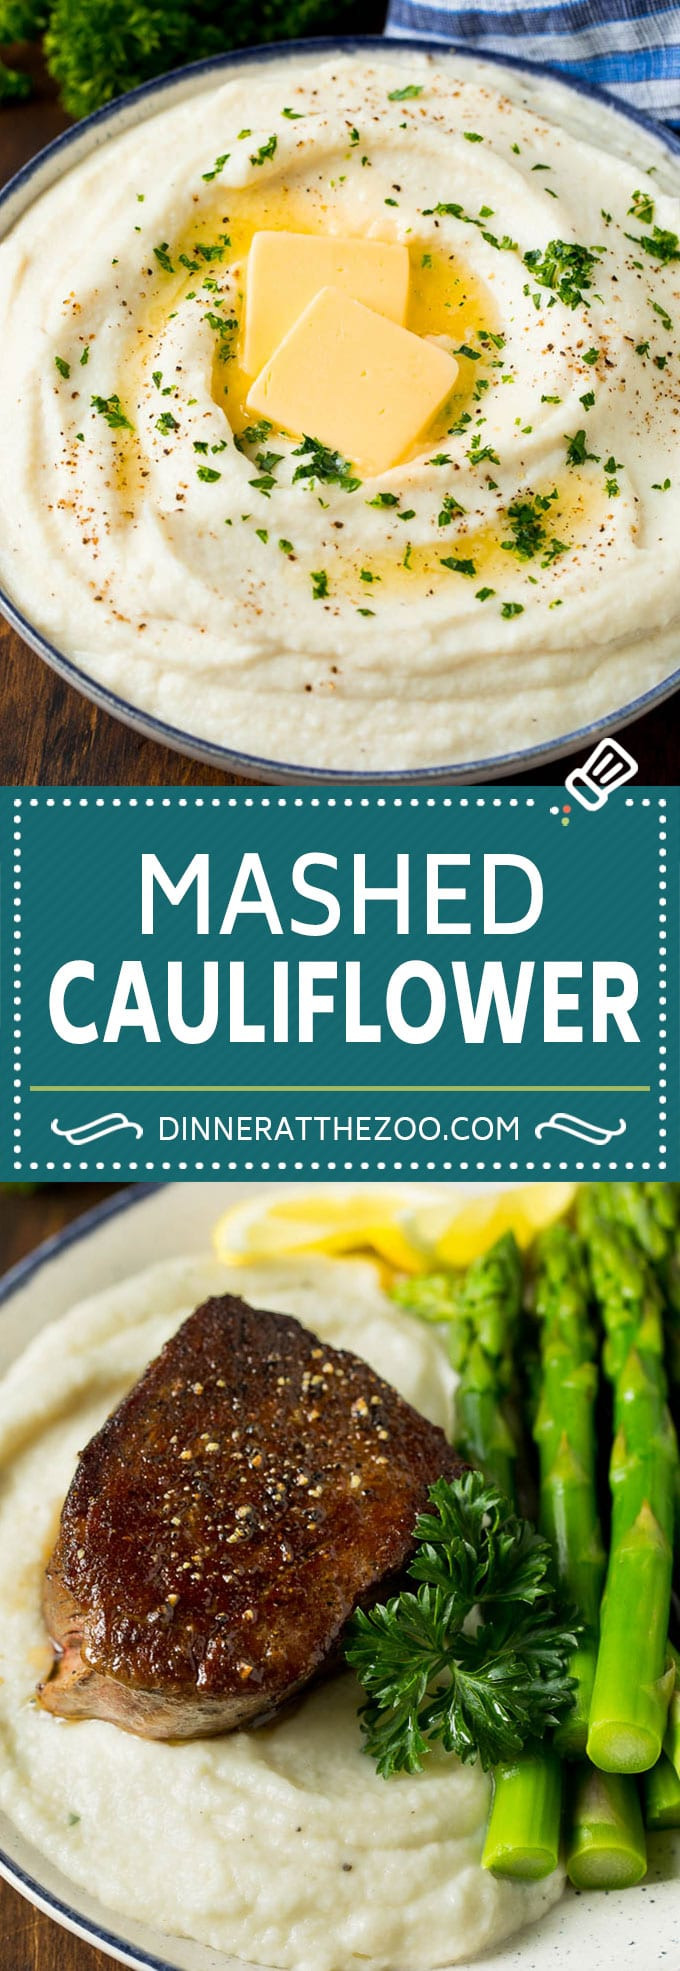 Do Mashed Potatoes Have Fiber
 Cauliflower Mashed Potatoes Dinner at the Zoo